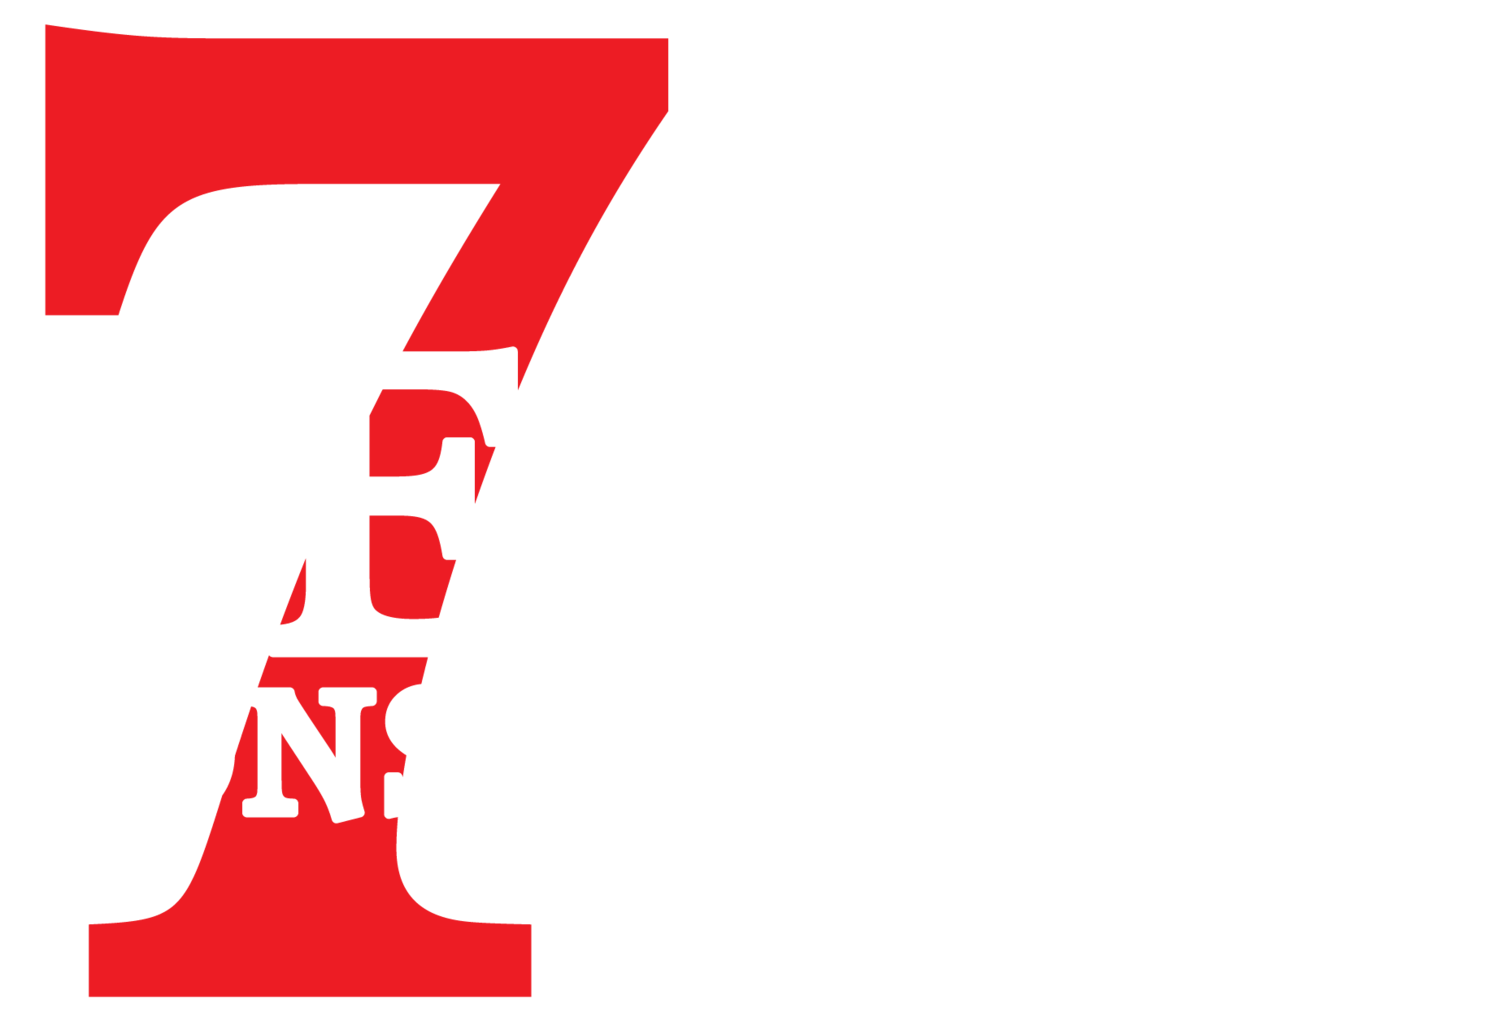 Seven Sons Trucking